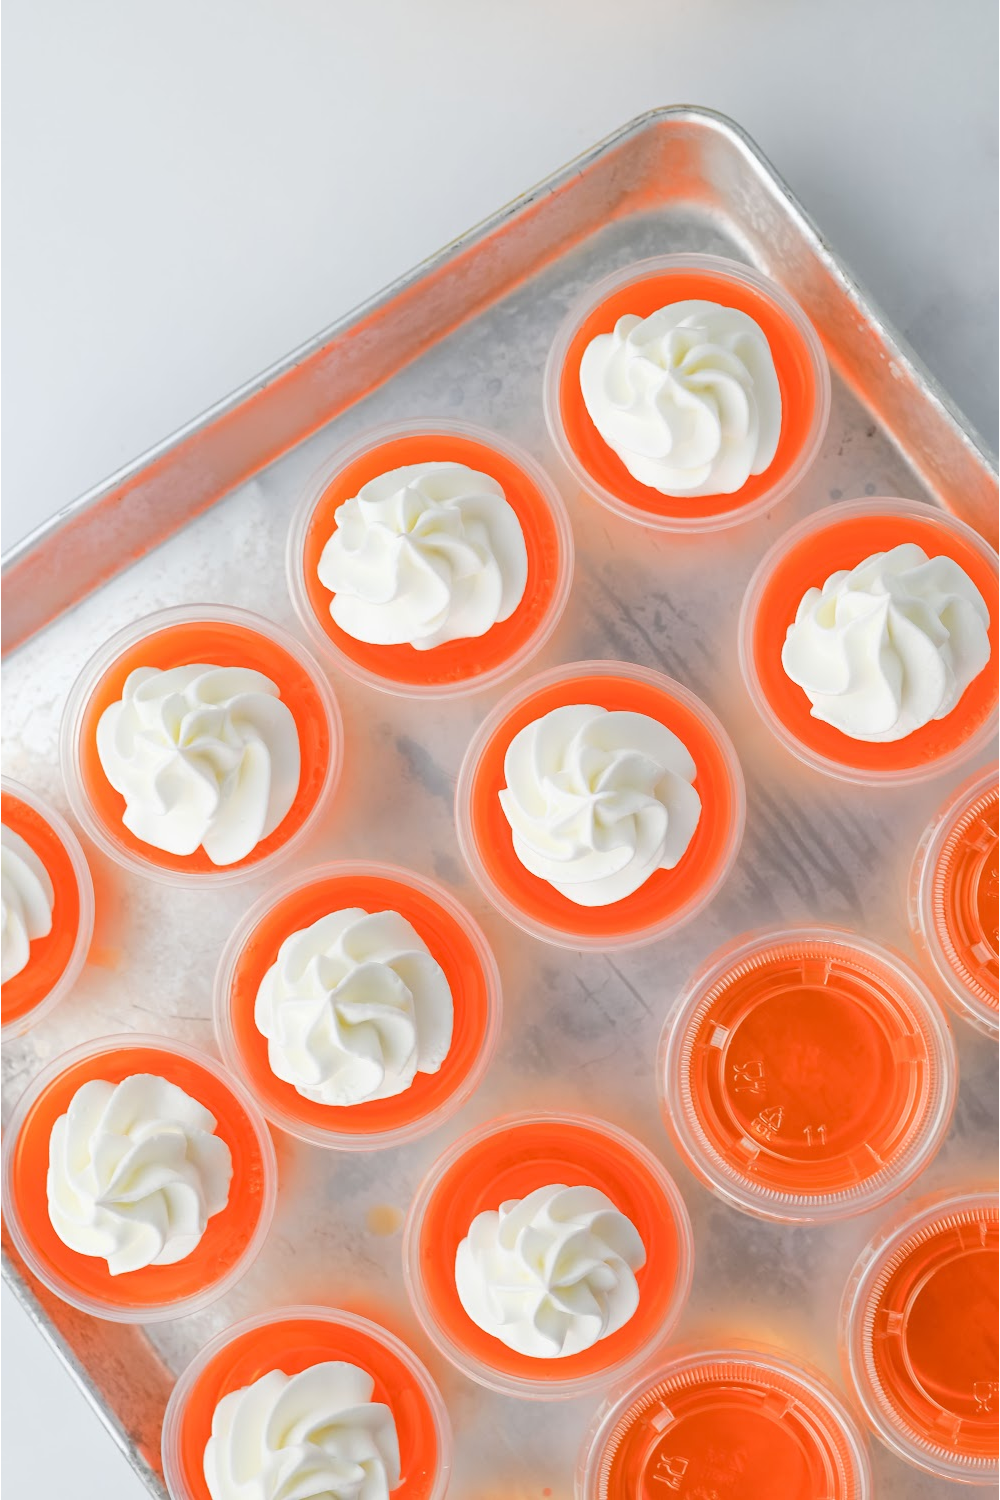 With the jello shots on a tray, decorate with whipped cream and add a cherry on top.